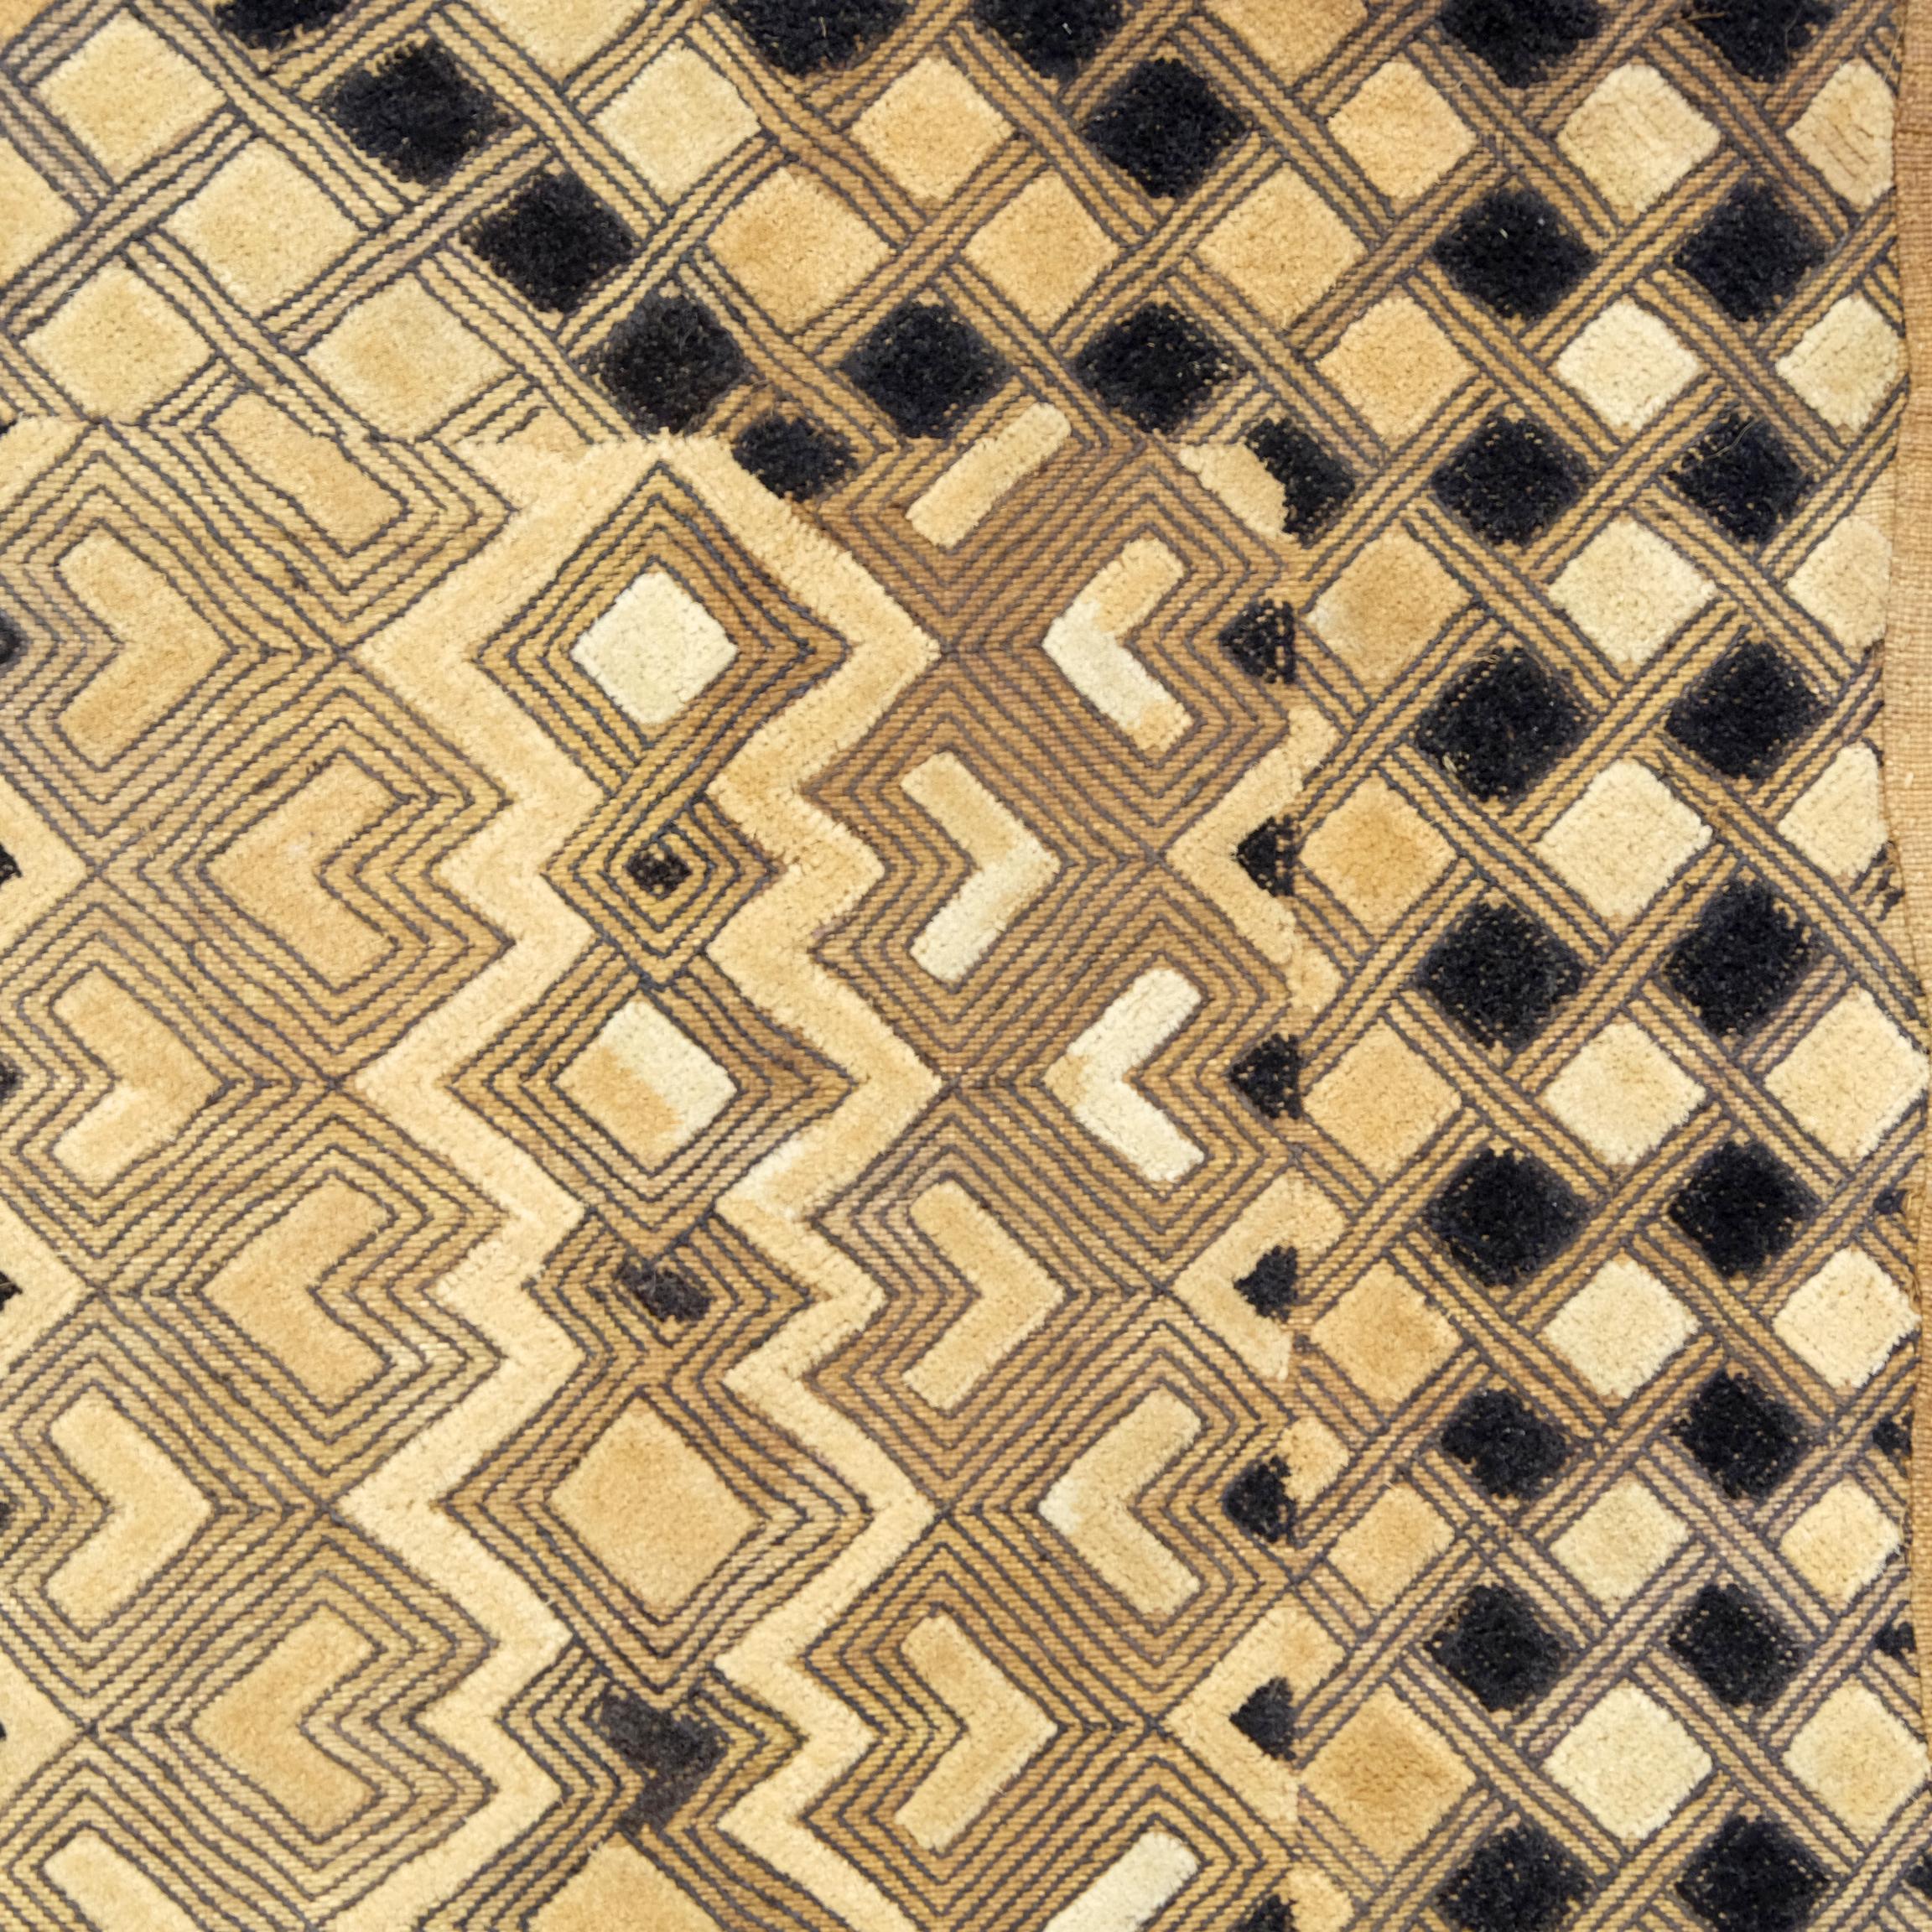 A vintage Kuba cloth in plain black timber frame. 
Kuba textiles are unique to the Democratic Republic of Congo and are prized for their complexity of design and earthy tones. Traditionally in Kuba society, the men weave the raffia cloth and the